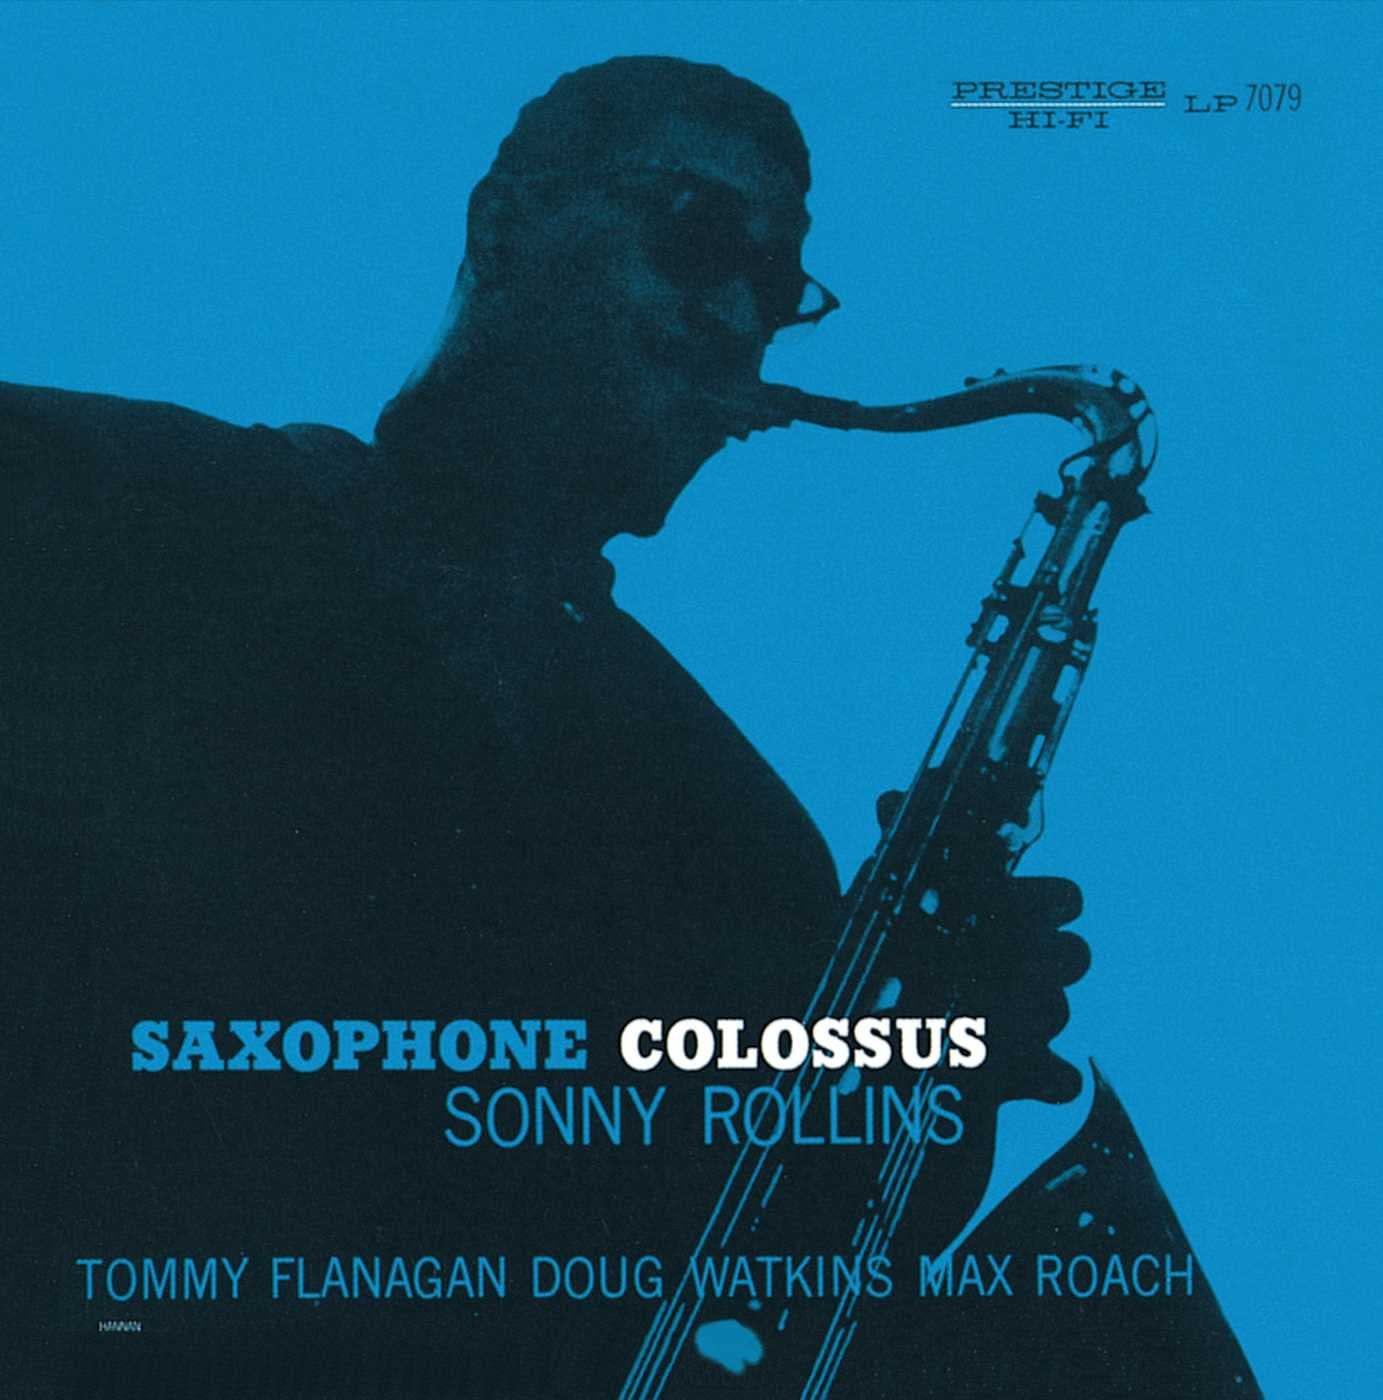  Happy 93rd birthday to Sonny Rollins  